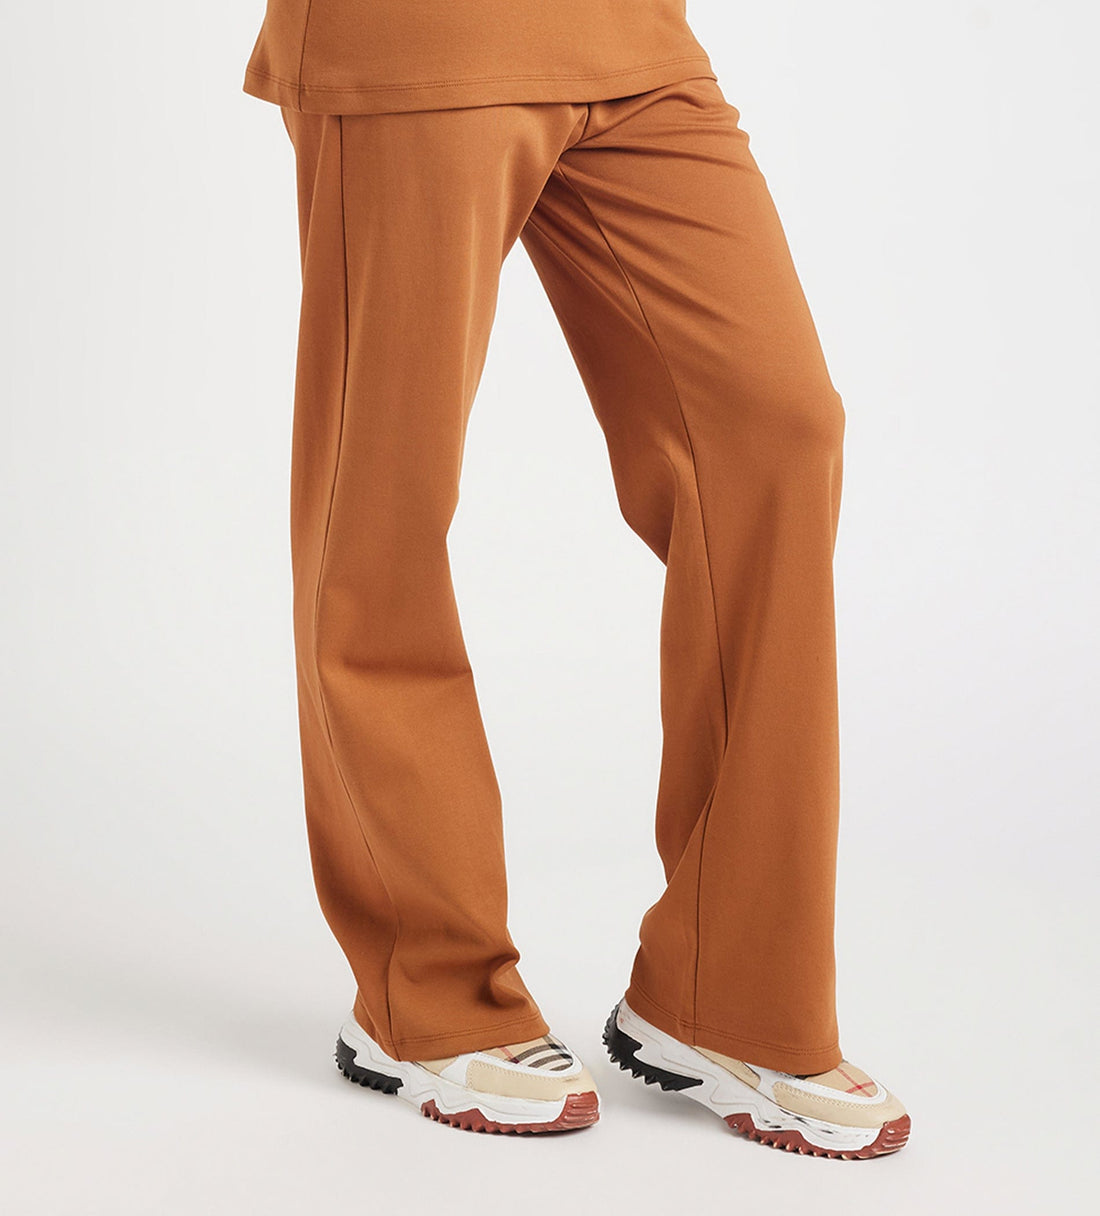 Trackpants Drawstring Trackpants Everyday Cotton Wide Leg Trackpants